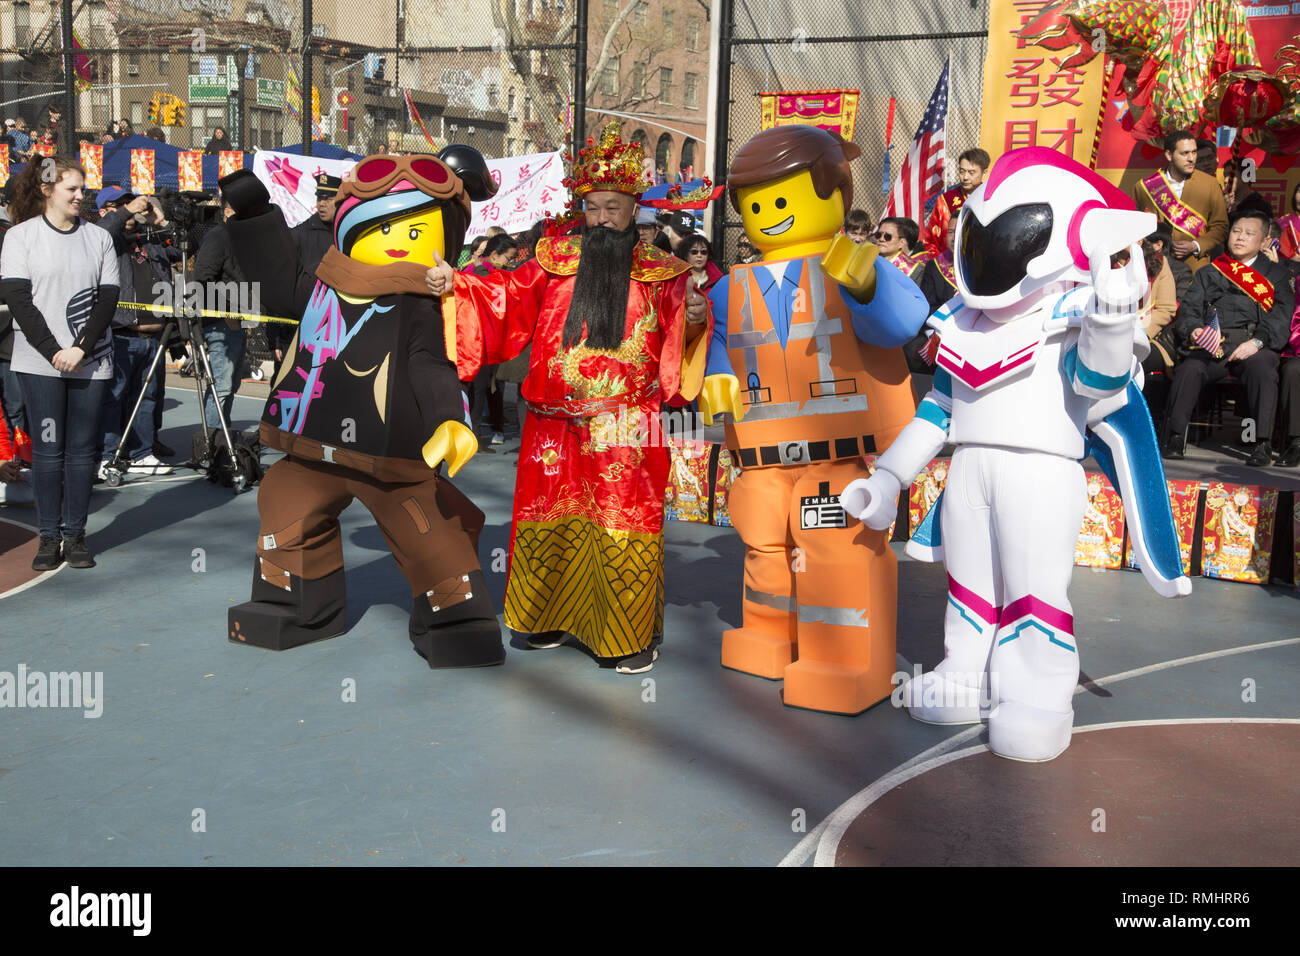 Characters from the film Lego 2, join in on the Lunar New Year festivities  in Chinatown, New York City in 2019, the Year of the Pig Stock Photo - Alamy